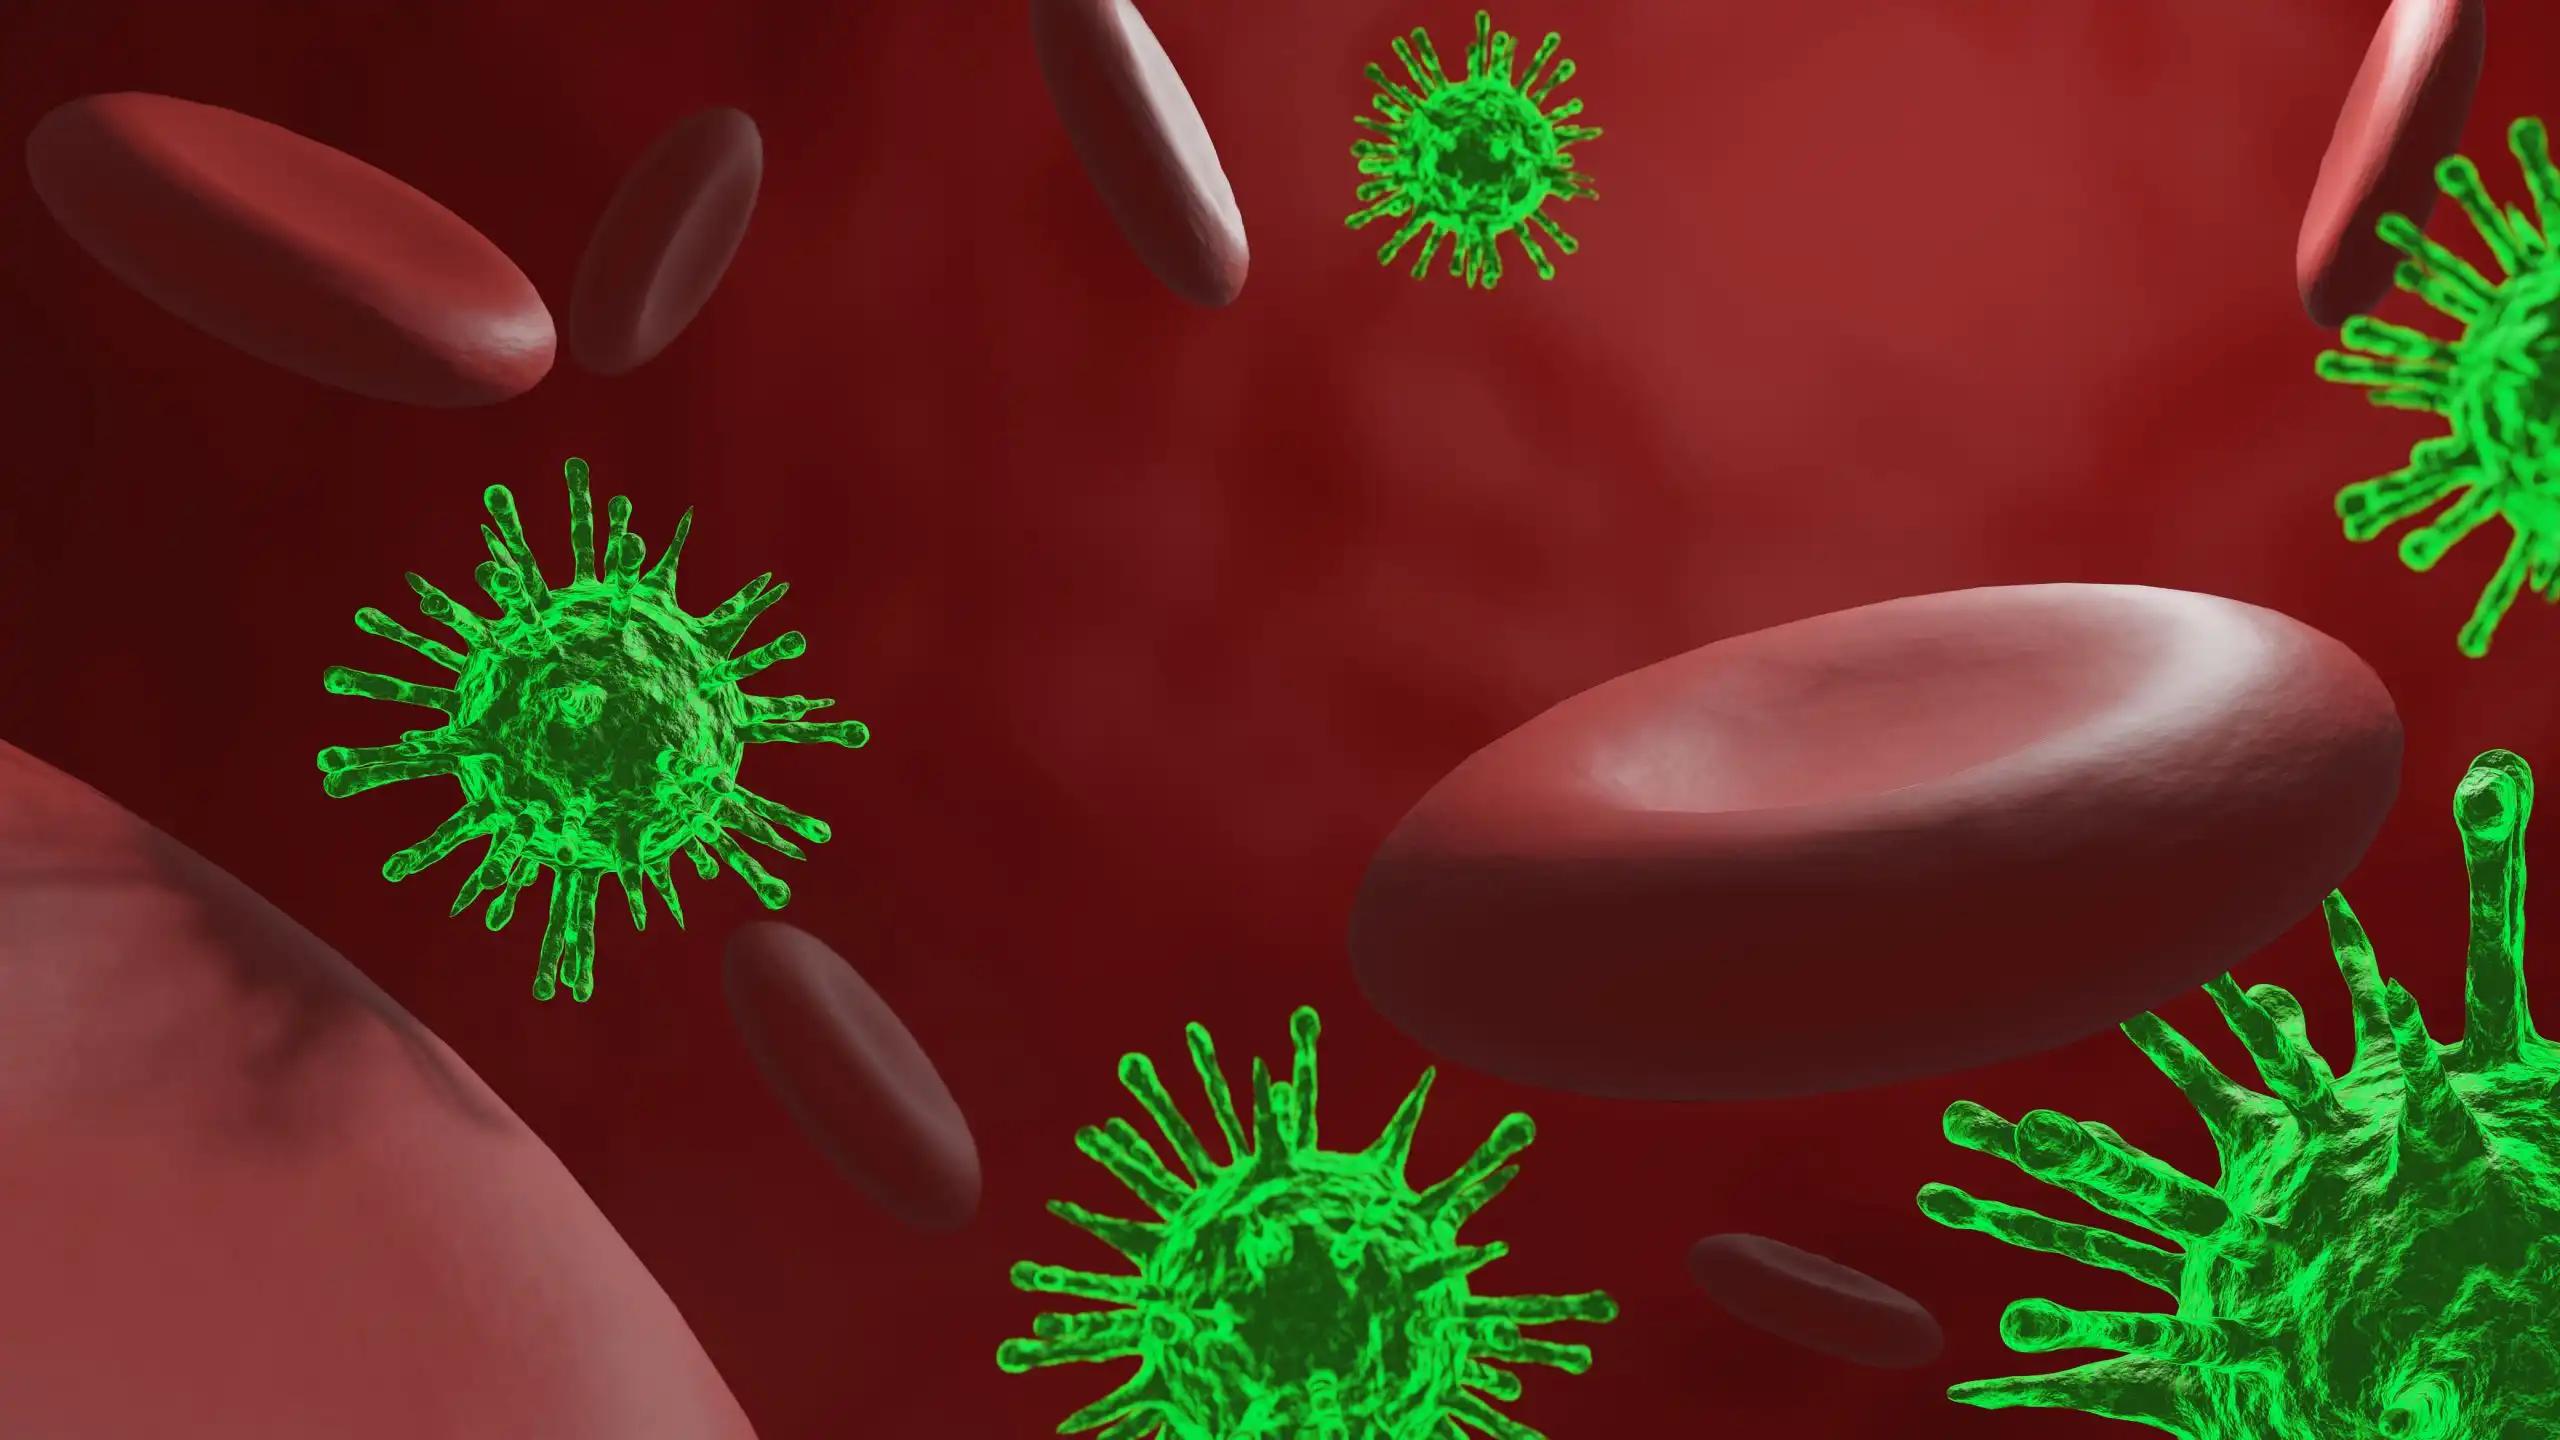 Cancer Viruses Attacking Red Blood Cells in Vesse